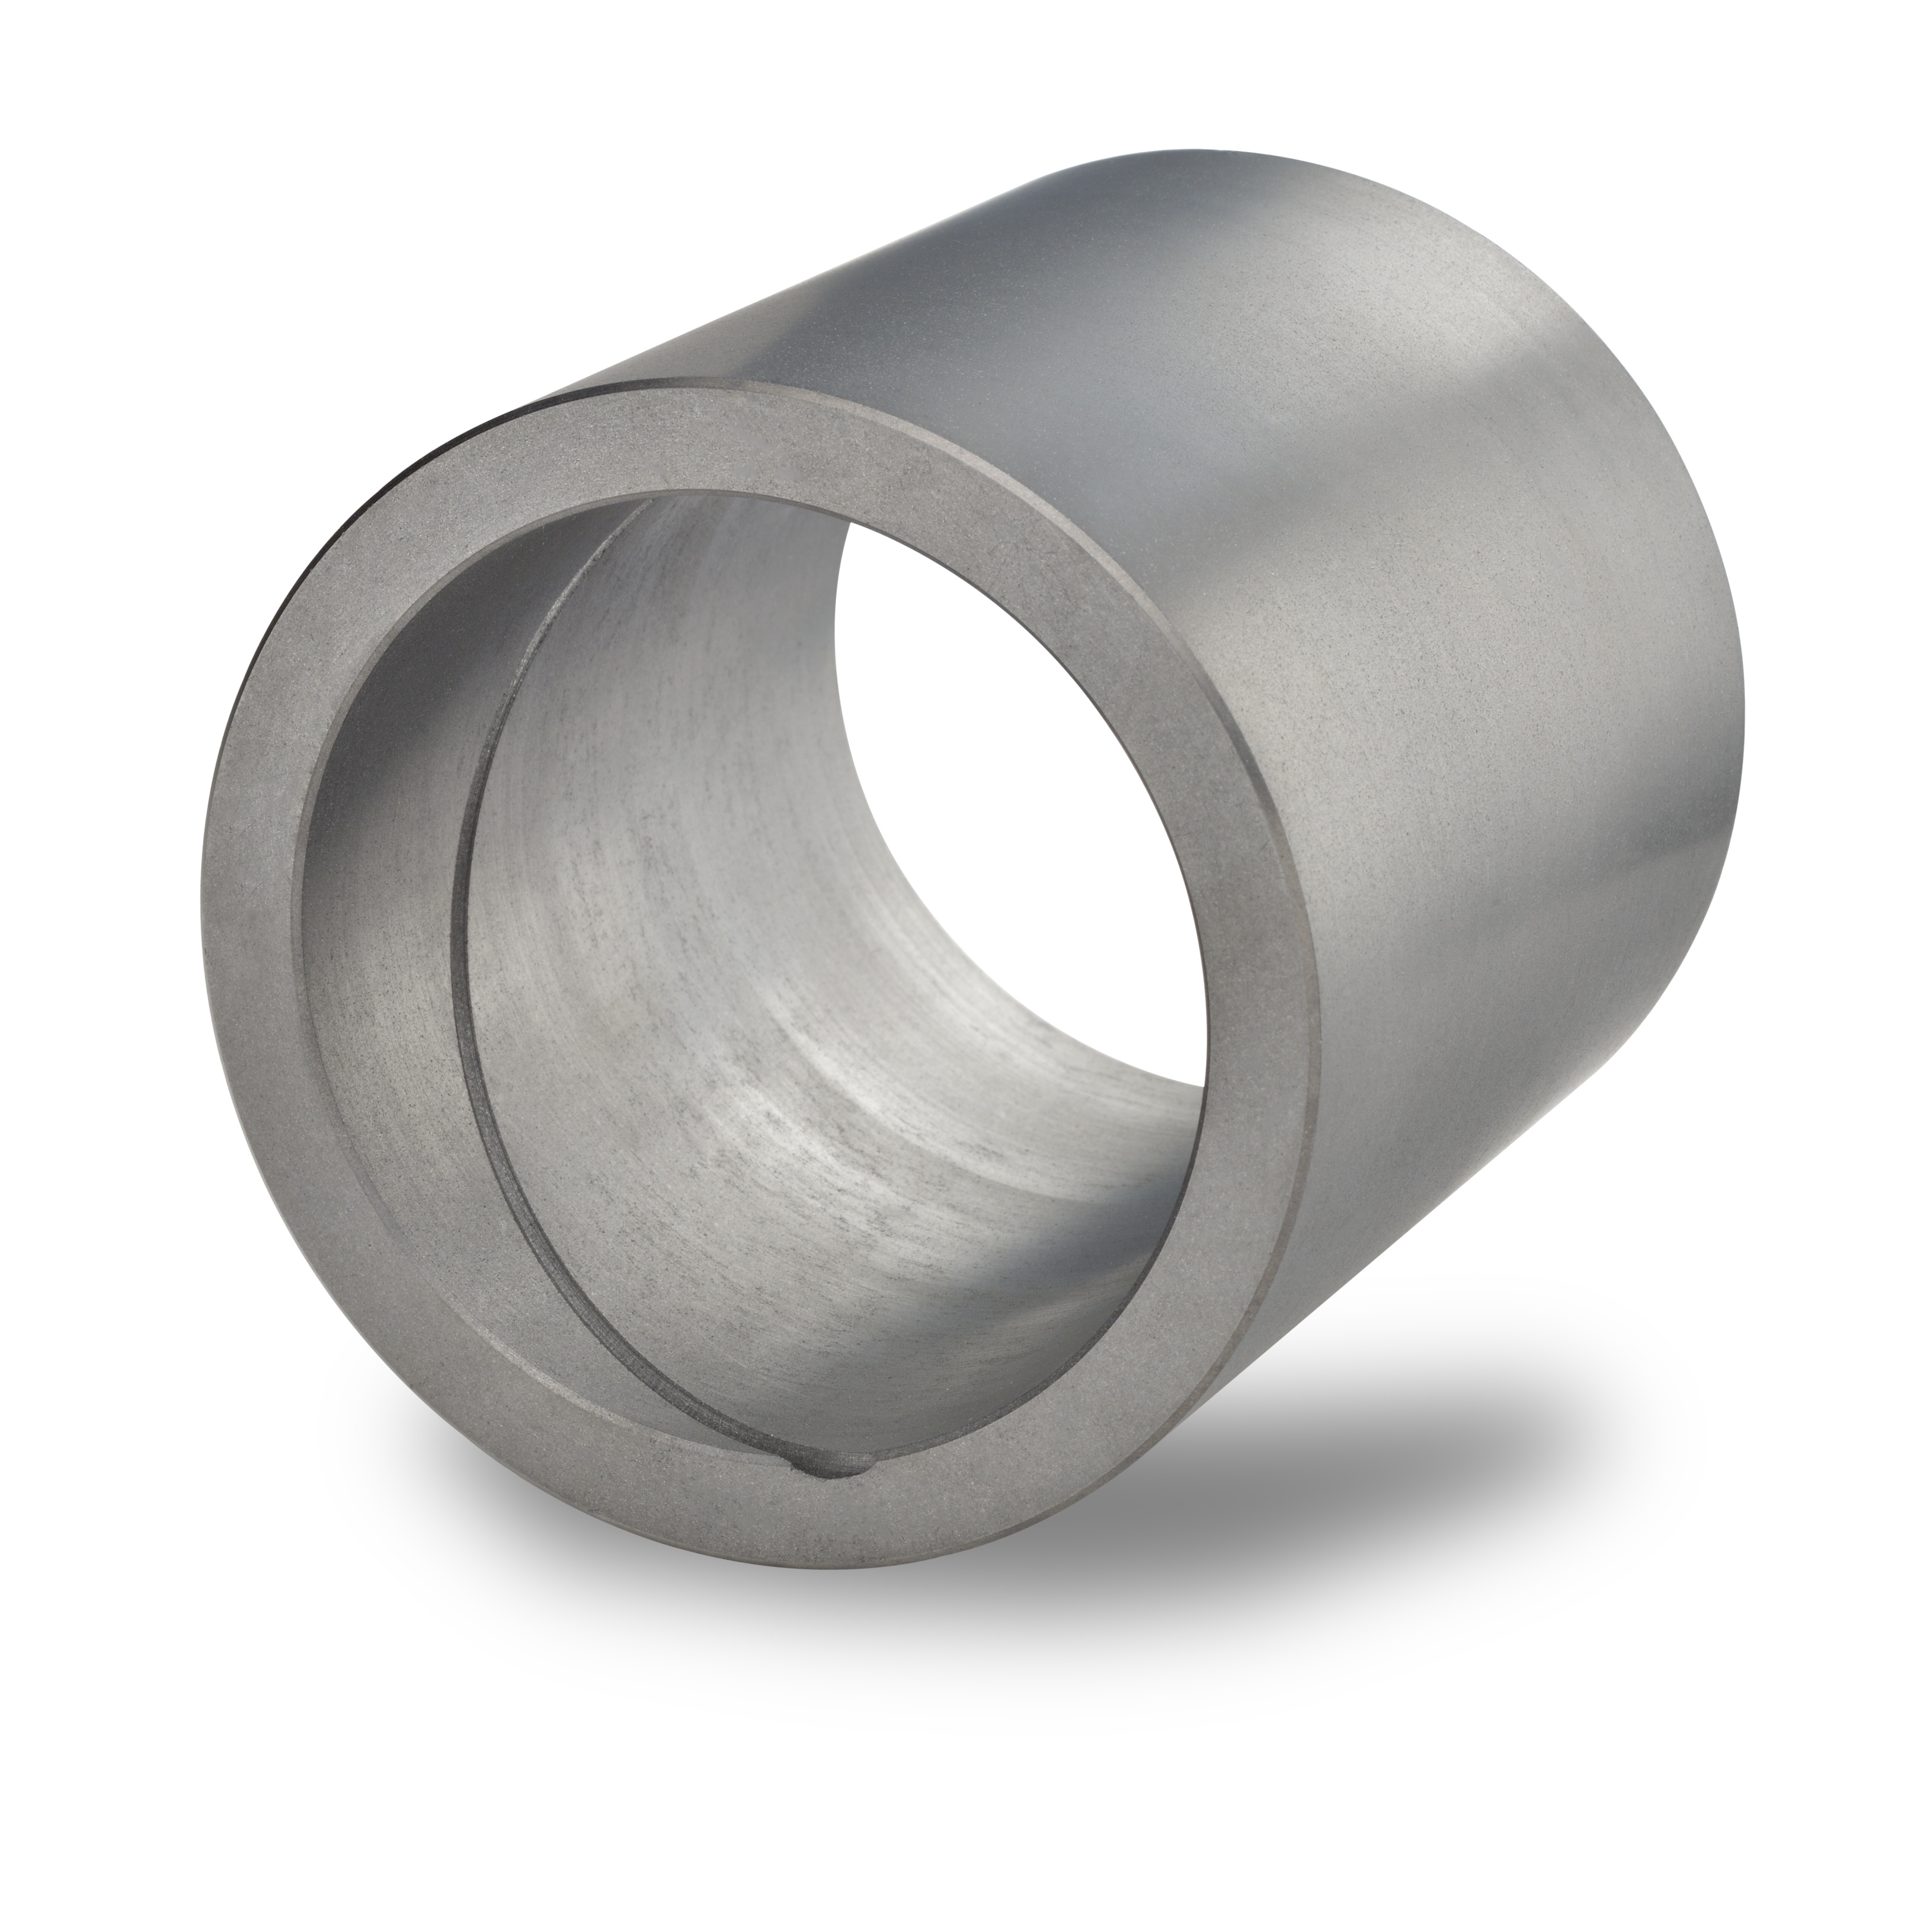 The Graphalloy spiral groove pump bushing was manufactured and shipped within an hour.